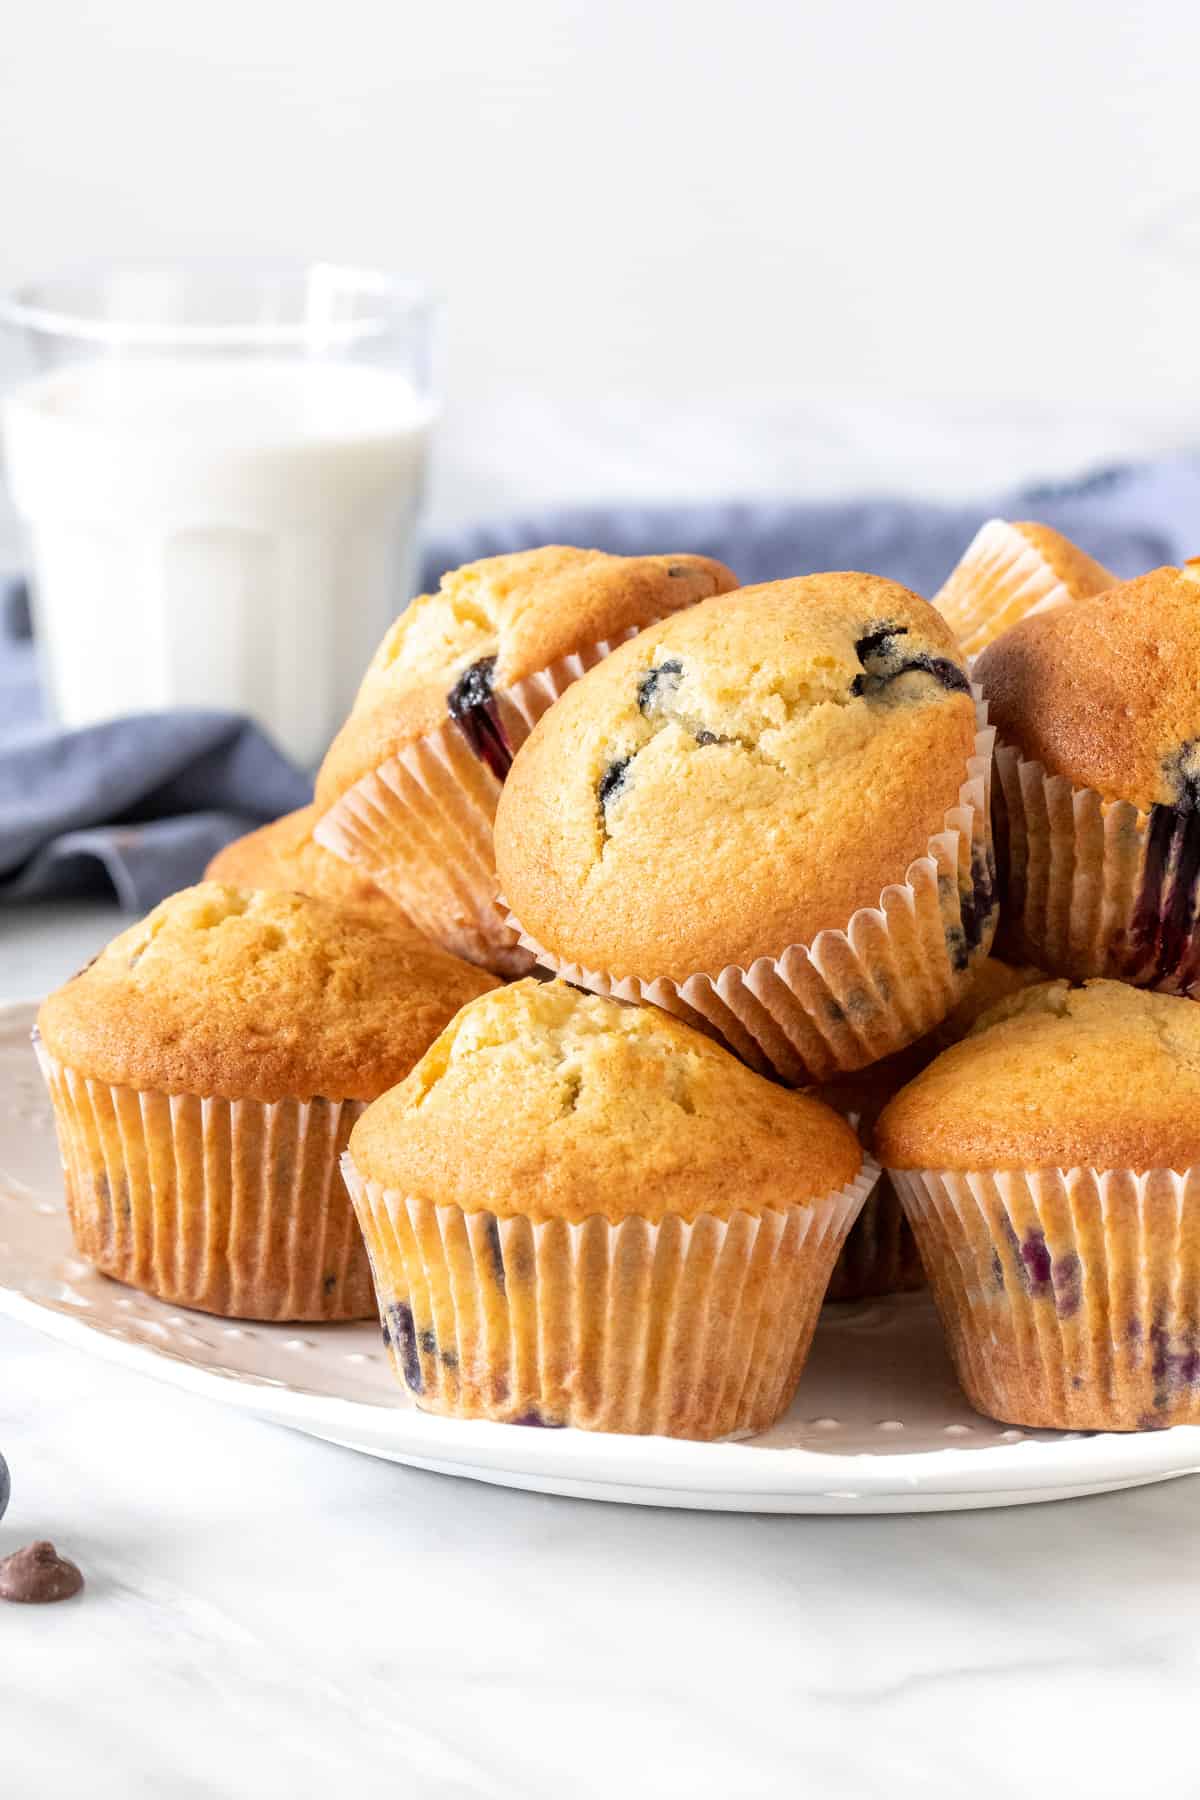 Plate of muffins, stacked on top of each other.